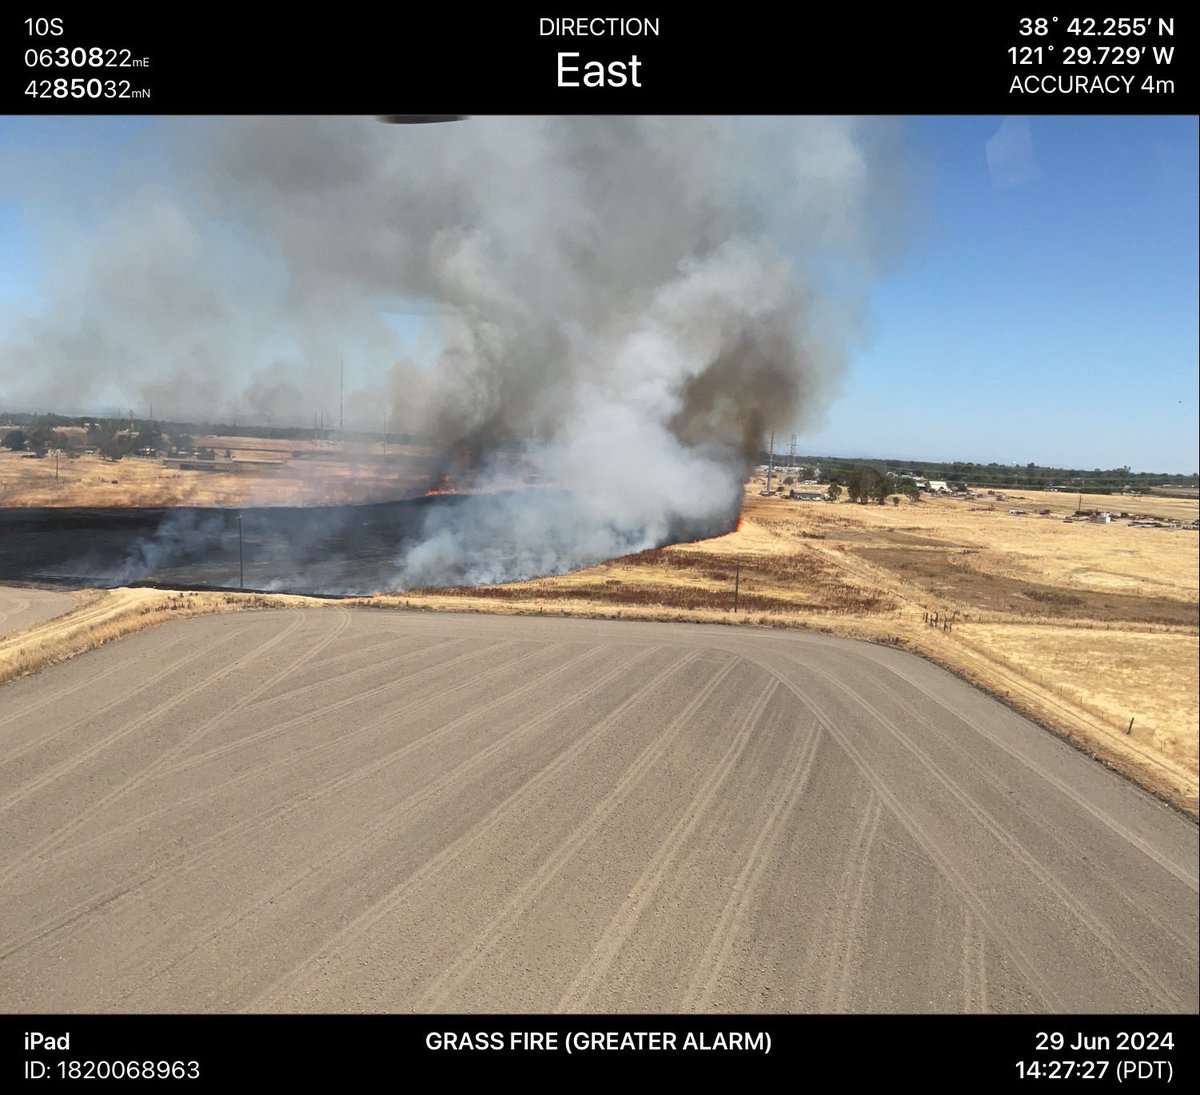 Grass Fire:7300 block of E Levee Rd. Crews arrived to a fast moving grass fire in light flashy fuels. Upon arrival, this was 1 acre fire that quickly spread to 4 acres and is still growing. Structures are threatened at this point. No injuries at this time